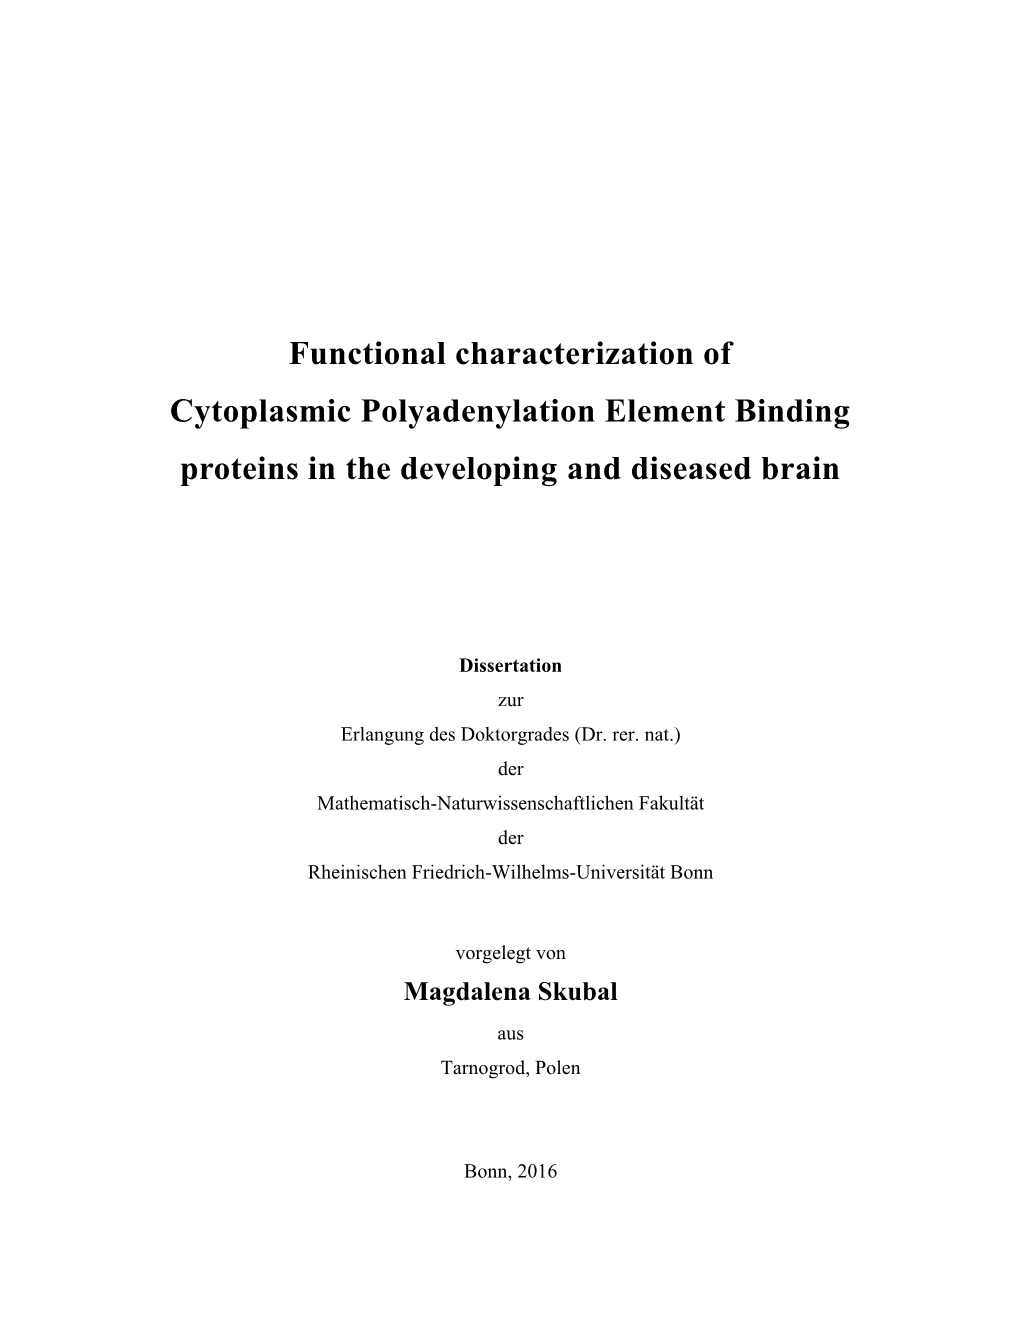 Functional Characterization of Cytoplasmic Polyadenylation Element Binding Proteins in the Developing and Diseased Brain